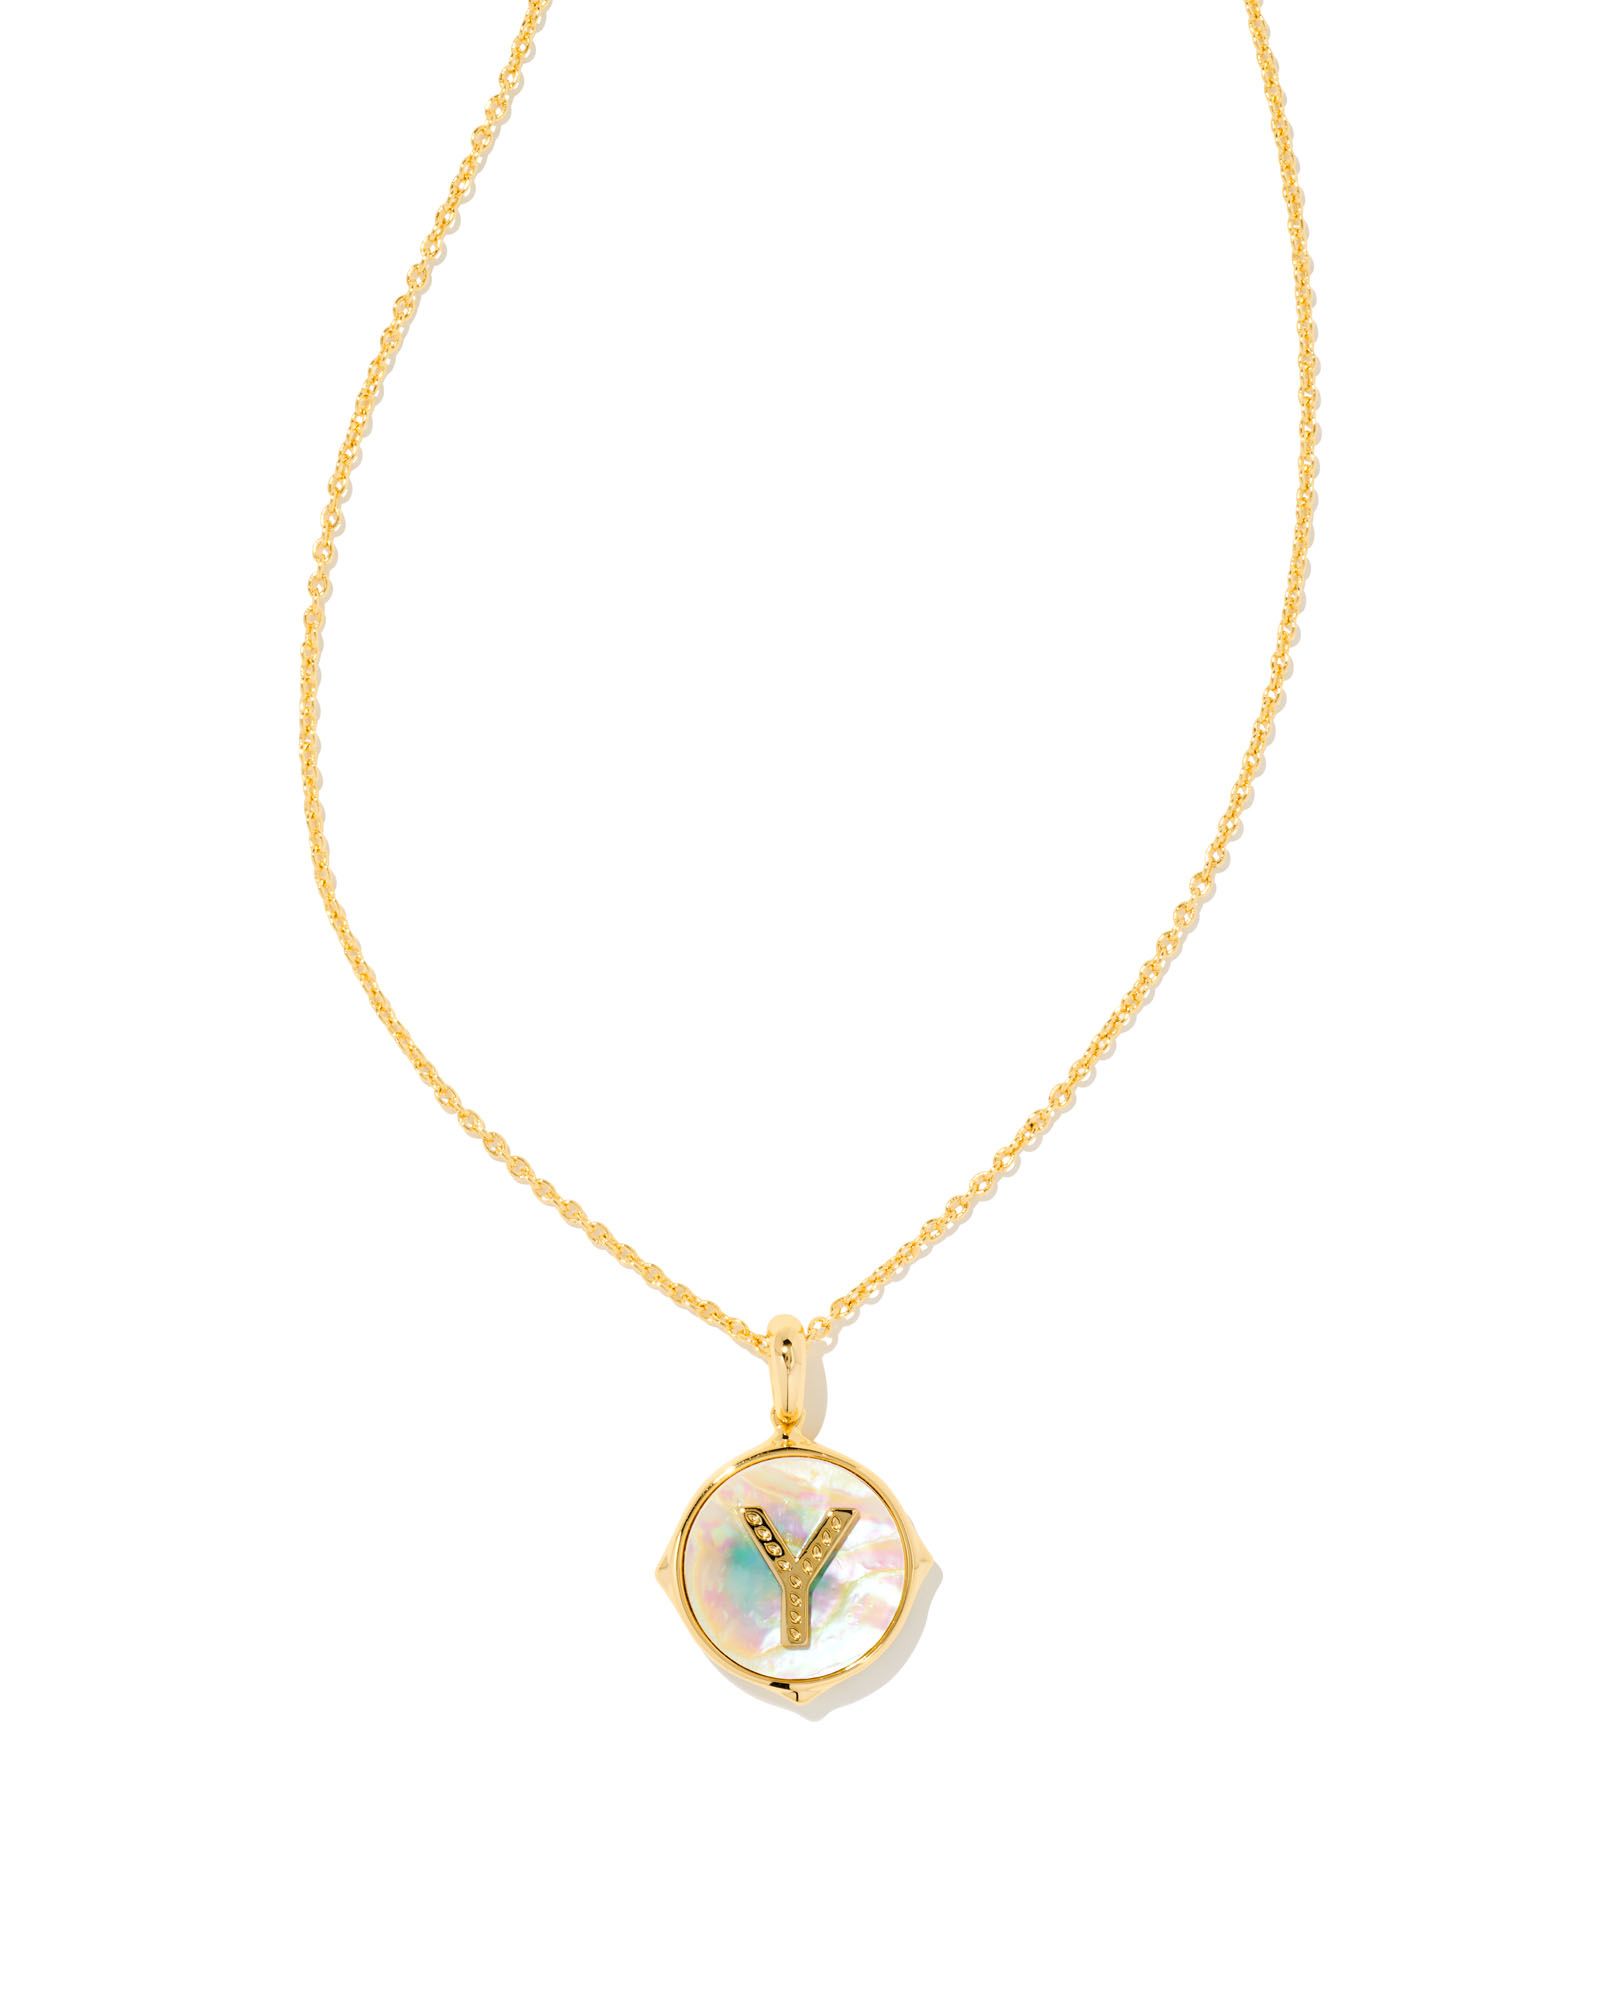 KENDRA SCOTT LETTER Y DISC IRIDESCENT ABALONE GOLD TONE PENDANT NECKLACE